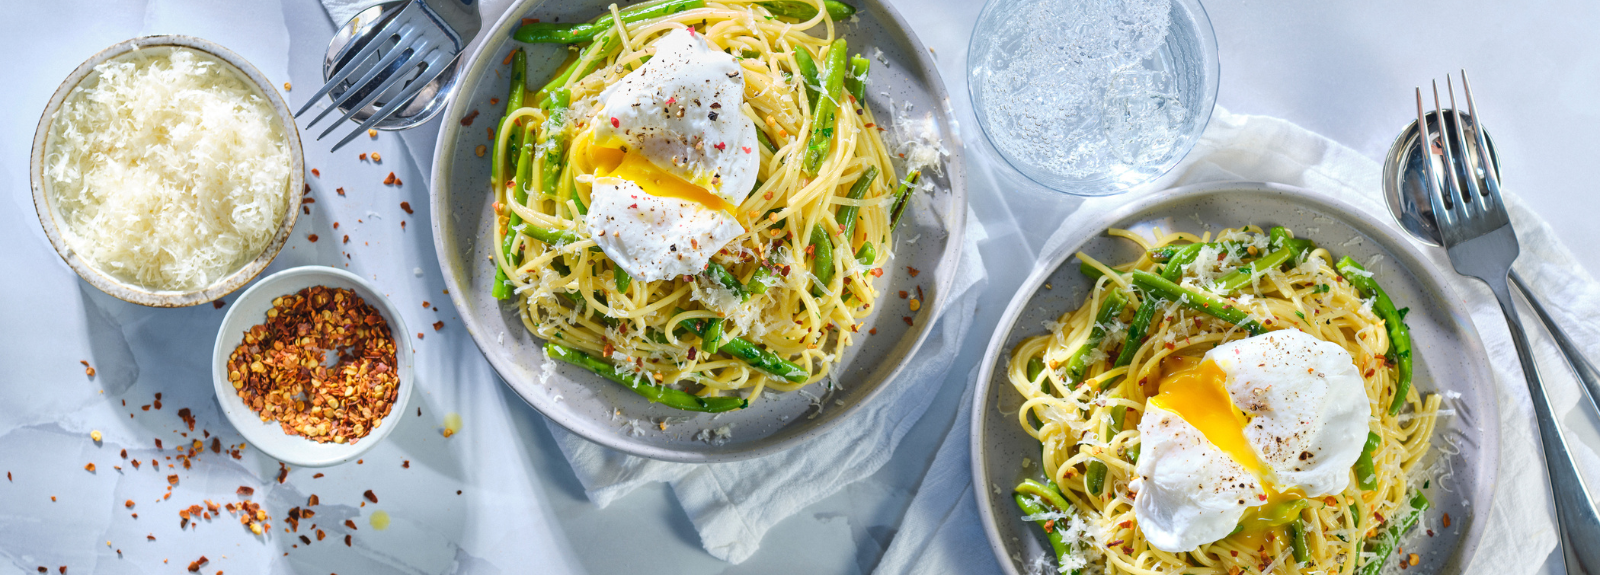 Green bean carbonara in bowl with a bowl of parm cheese and a small bowl of chilli flakes beside it